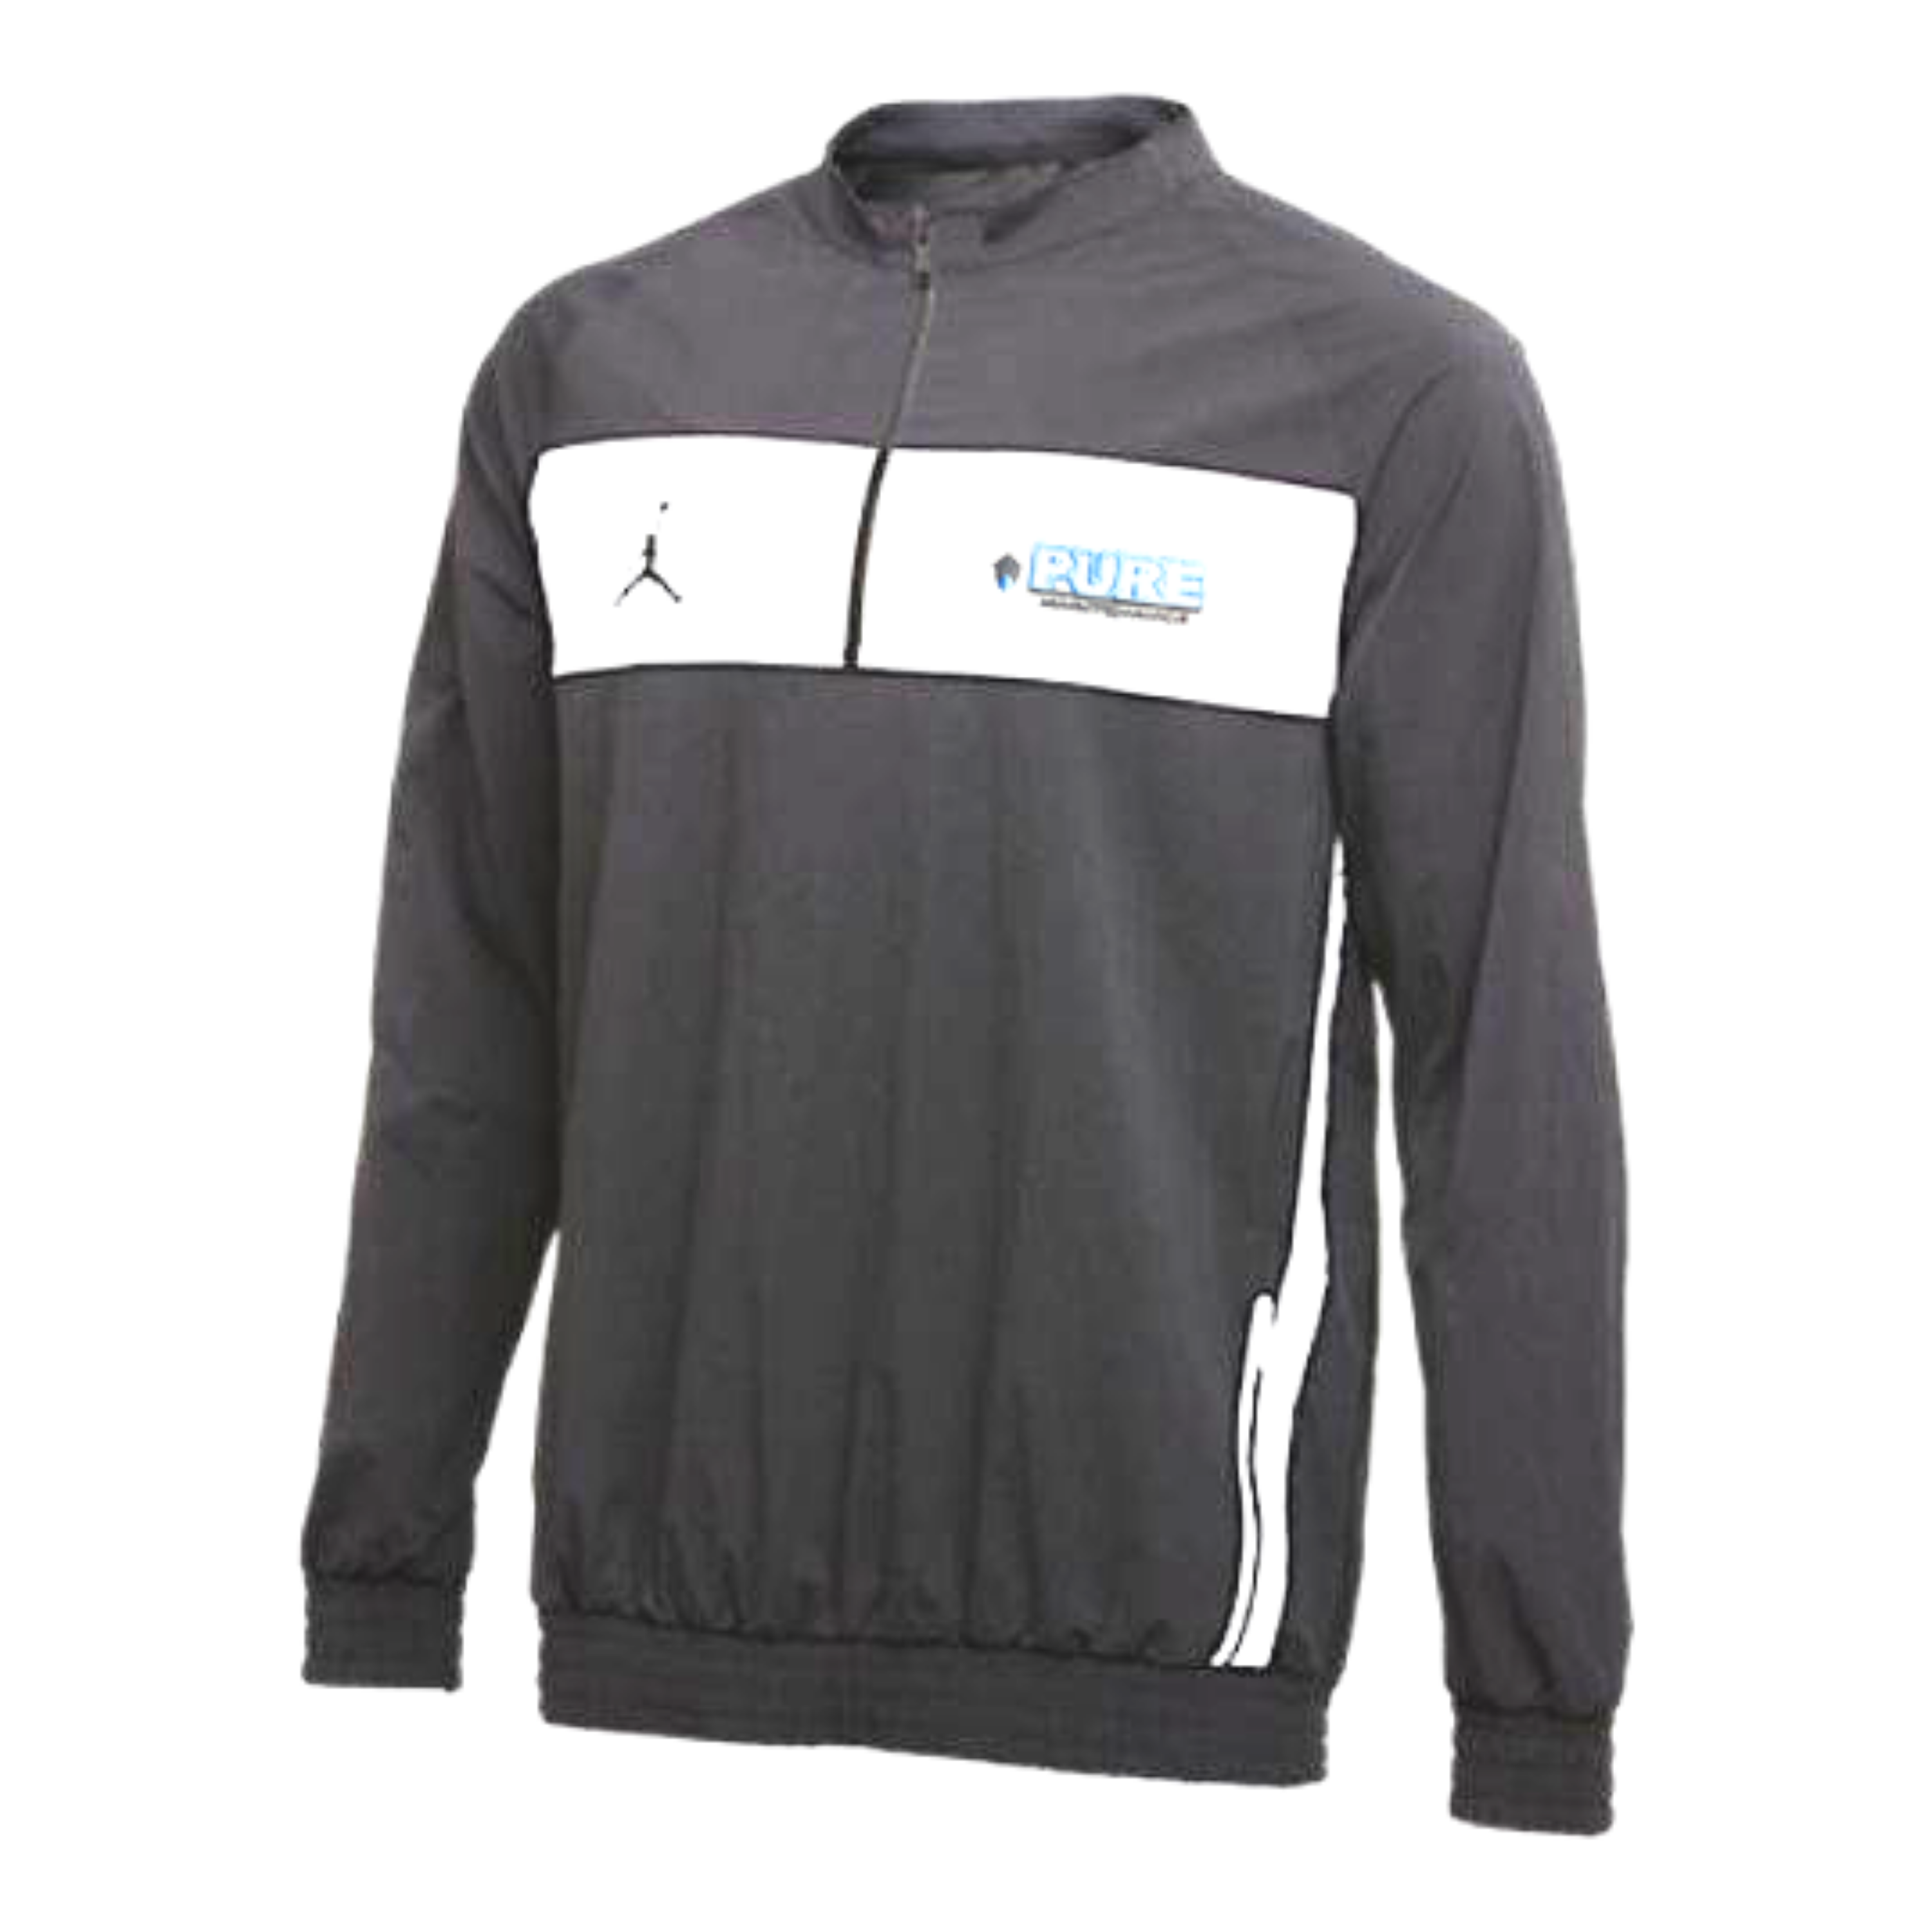 Pure Maintenance Jordan Gray 1/4 zip with side zippers  DISCONTINUED